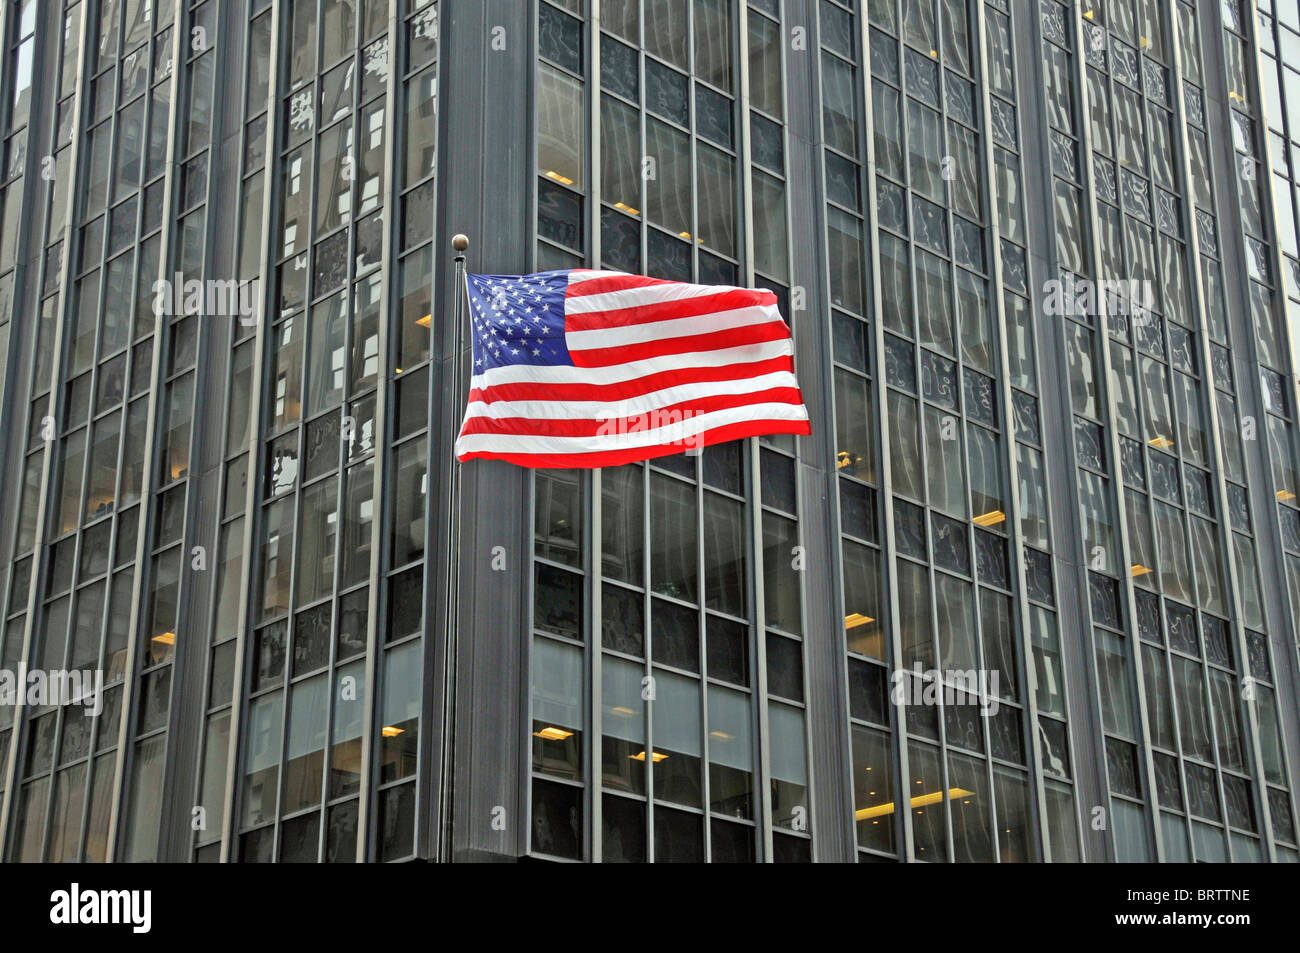 Boston, MA USA Shopping Mall Store Front with American Flags Waving with  Skyscrapers in the Background Skyline Stock Photo - Image of business,  people: 108180448